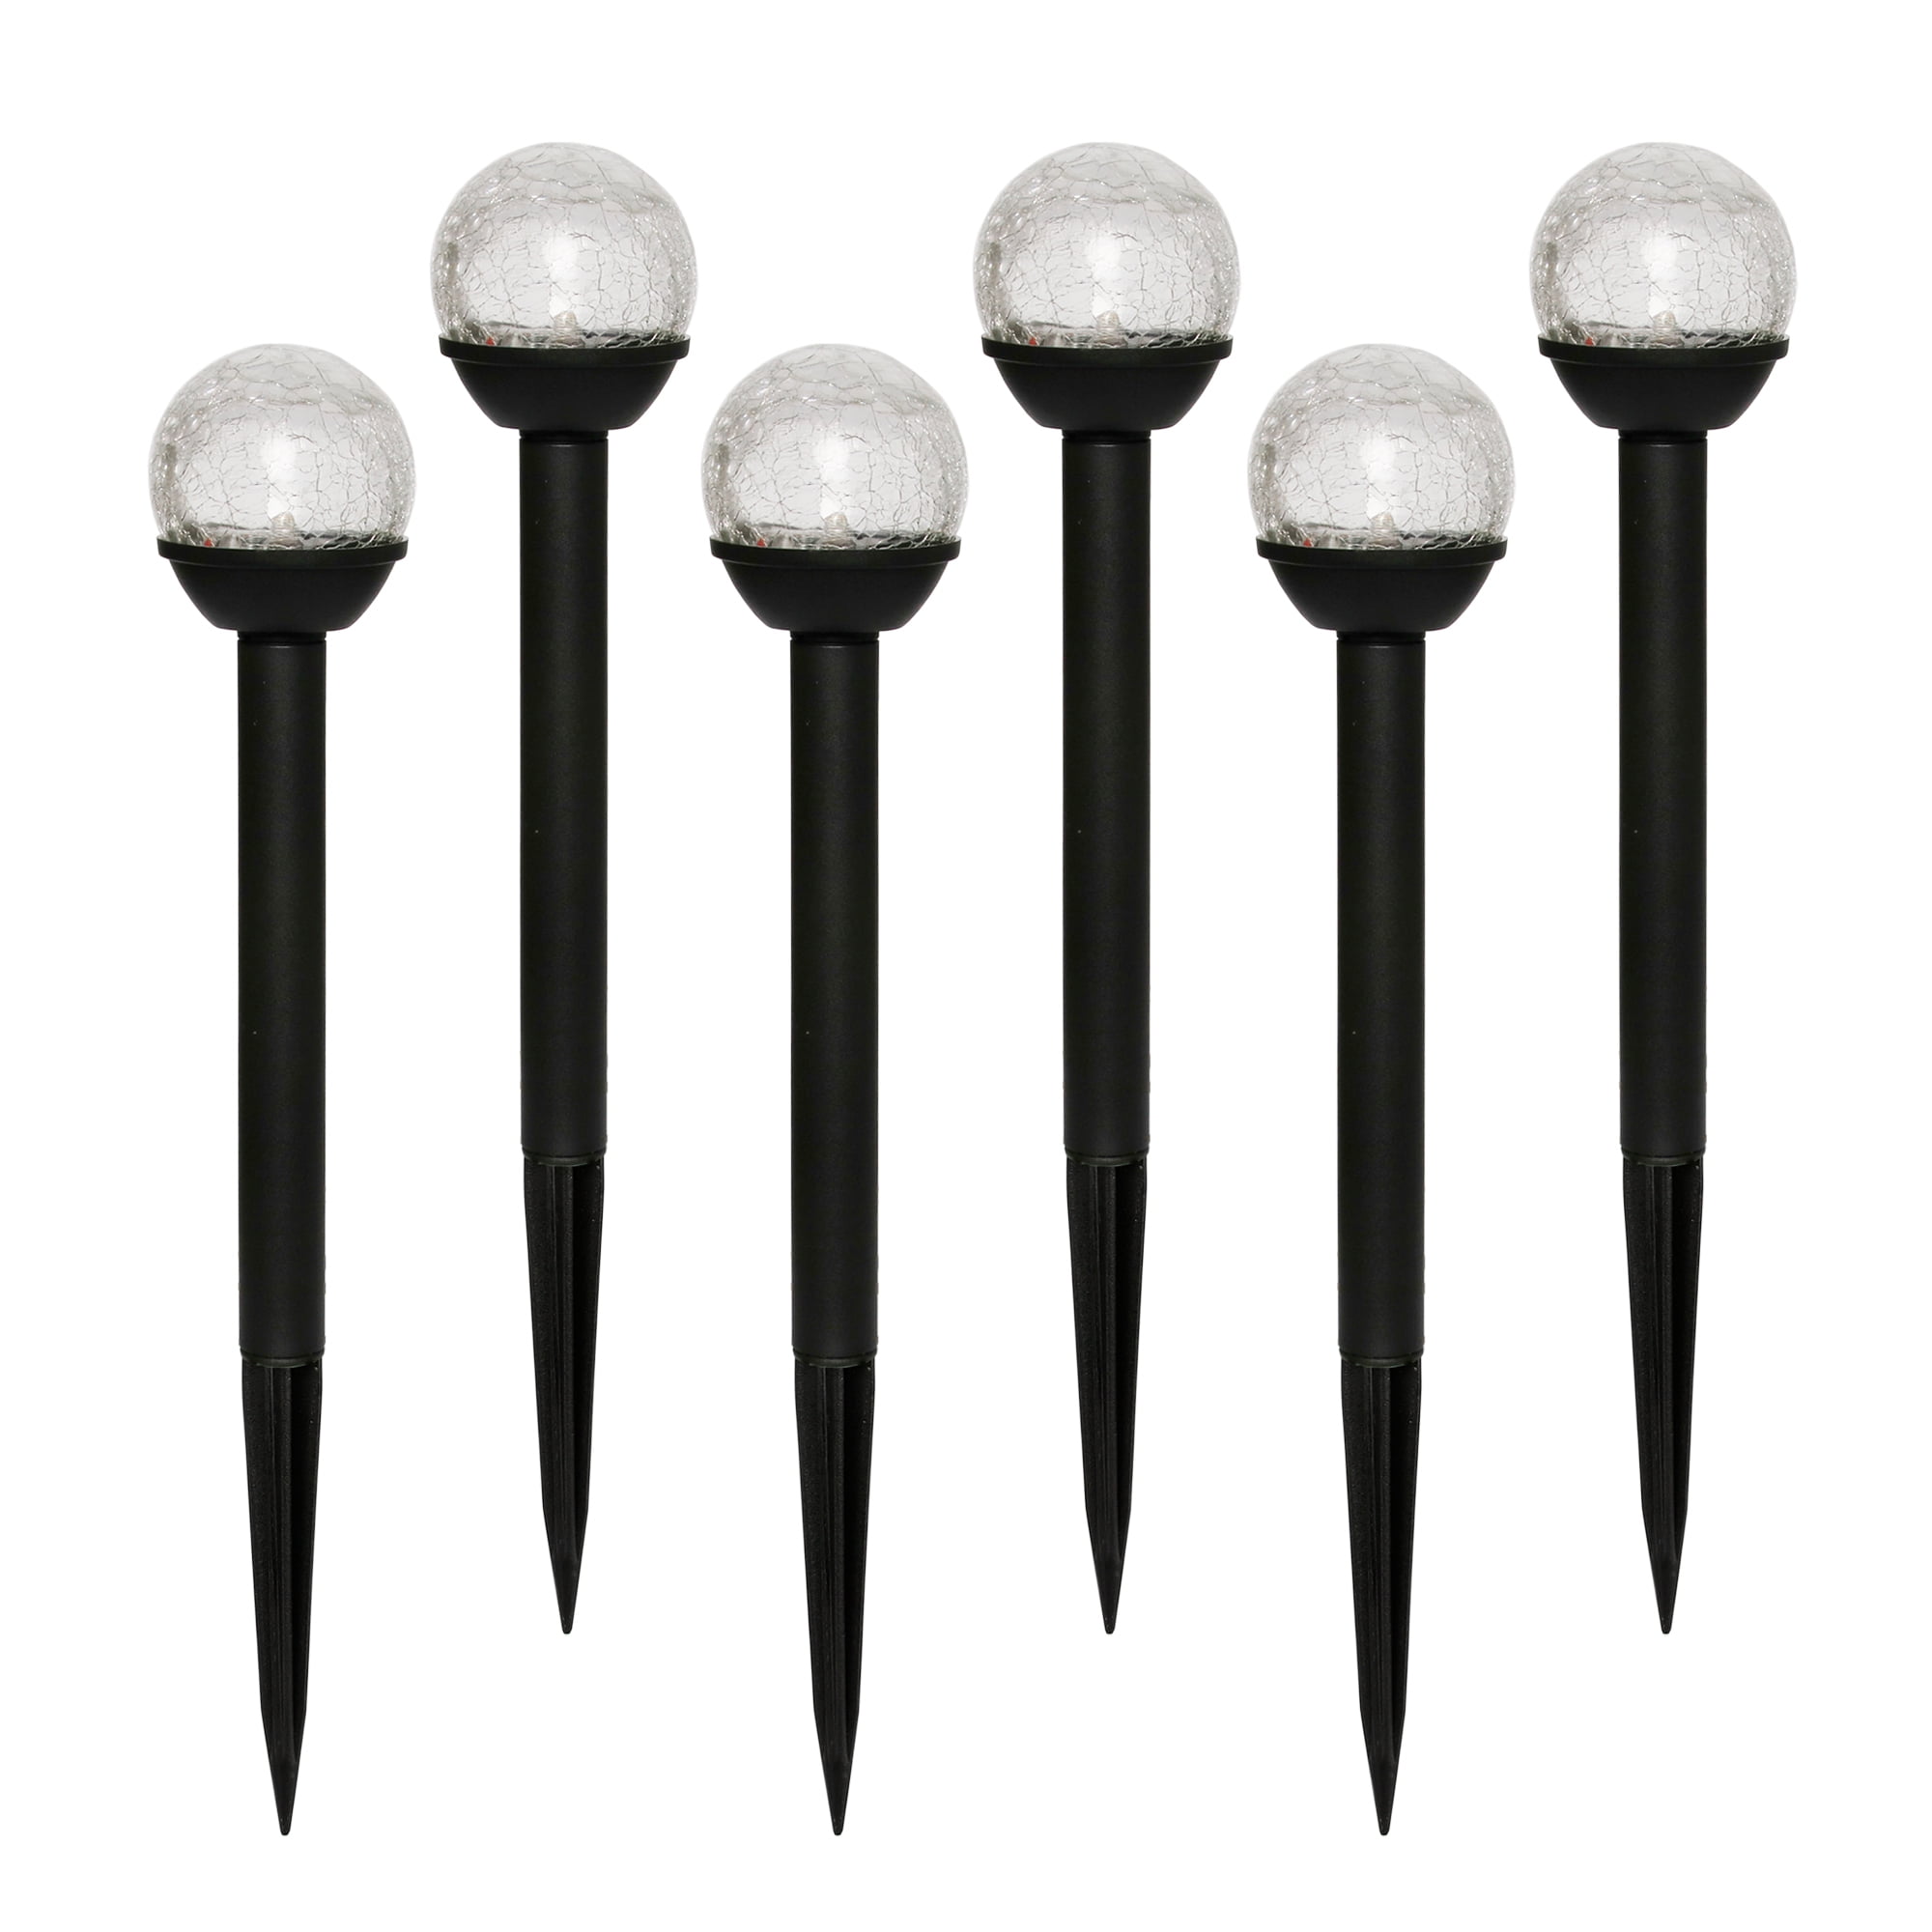 Silver & Stone 6 PK Solar LED Crackle Ball Effect Garden Lights Rechargeable Glass Look Garden Ground Stake Lights Borders and Flowerbeds Outdoor Pathway Globe Solar Lights for Lawns